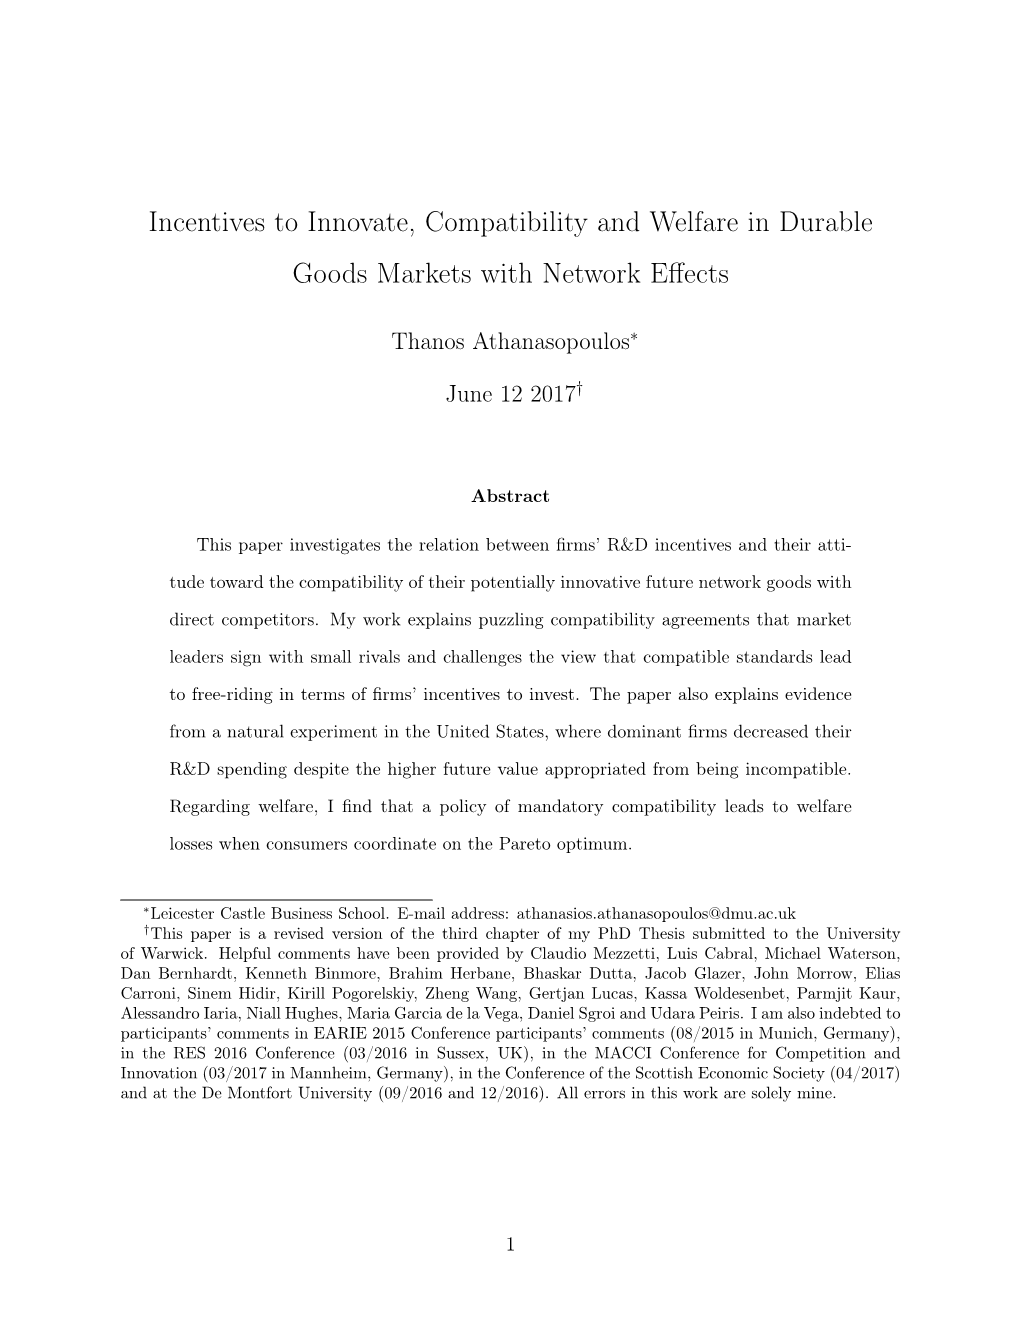 Incentives to Innovate, Compatibility and Welfare in Durable Goods Markets with Network Effects